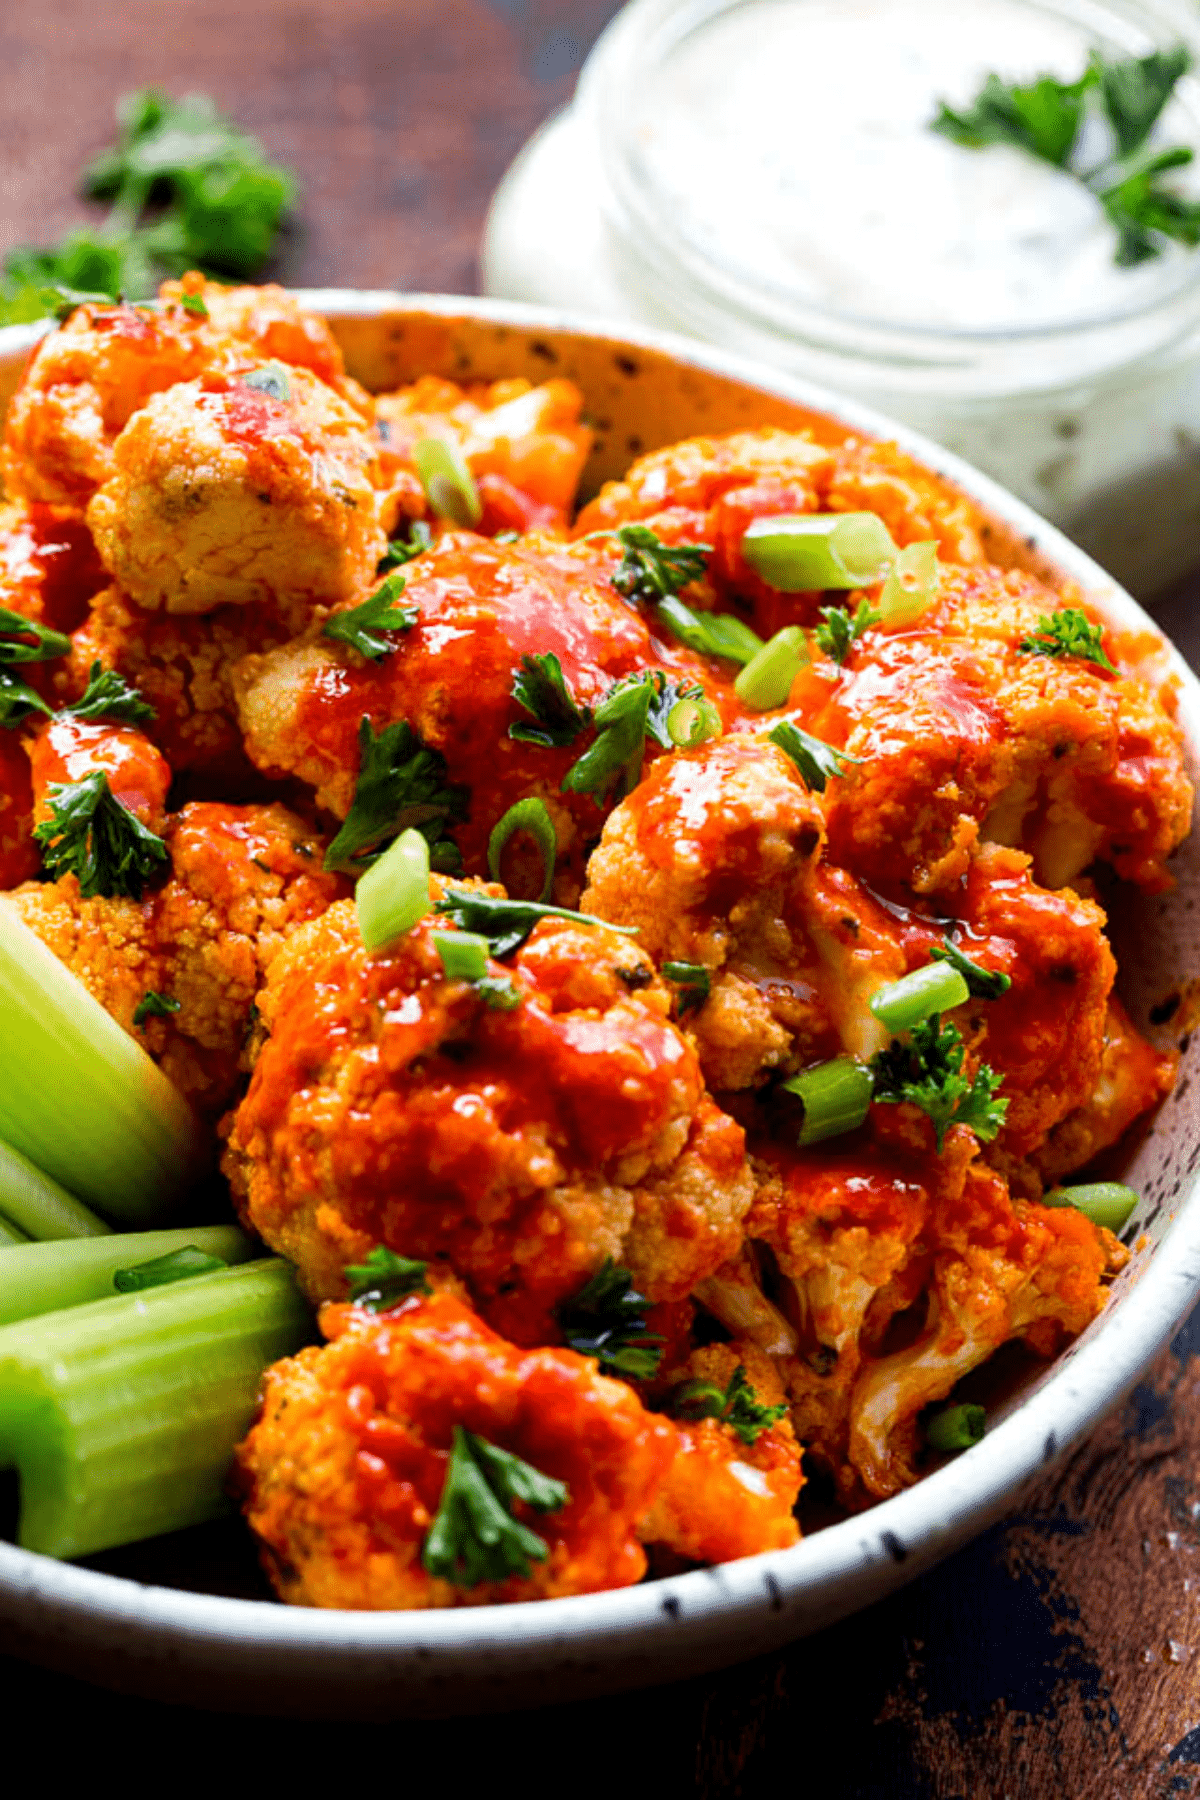 Cauliflower florets topped with hot sauce and served in a bowl with celery sticks.